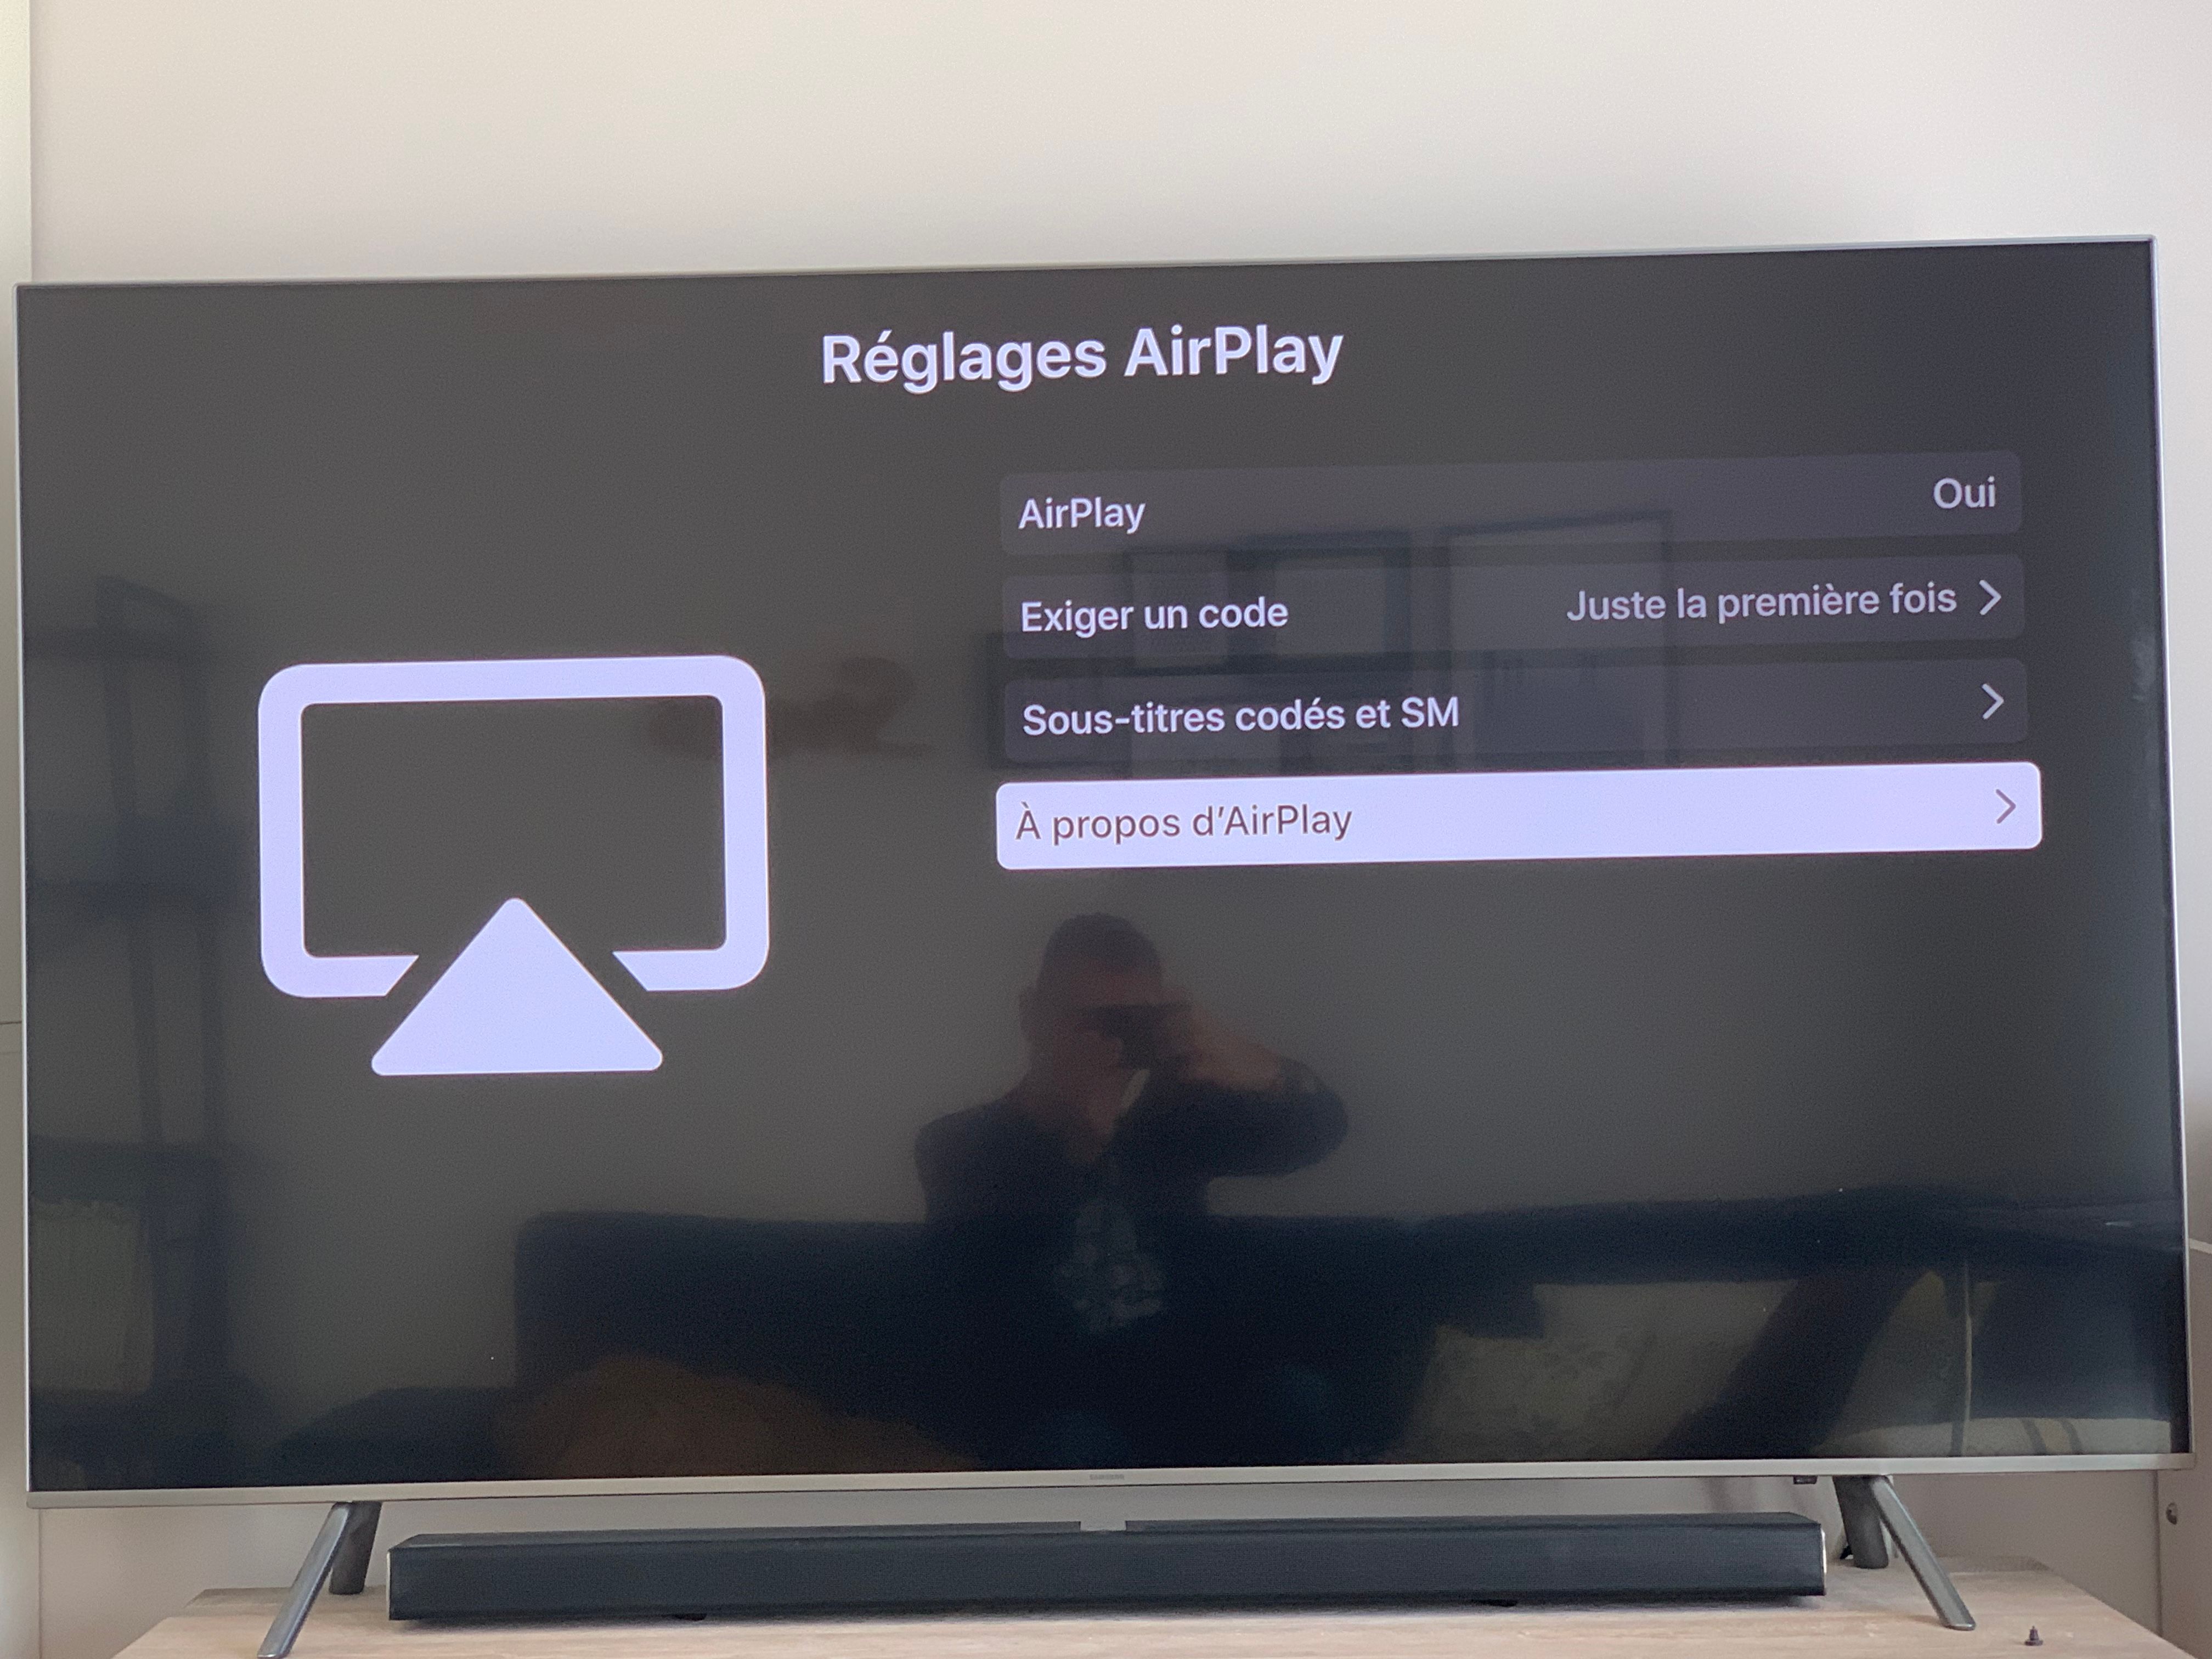 Solved: AirPlay 2 problem - Page 5 - Samsung Community